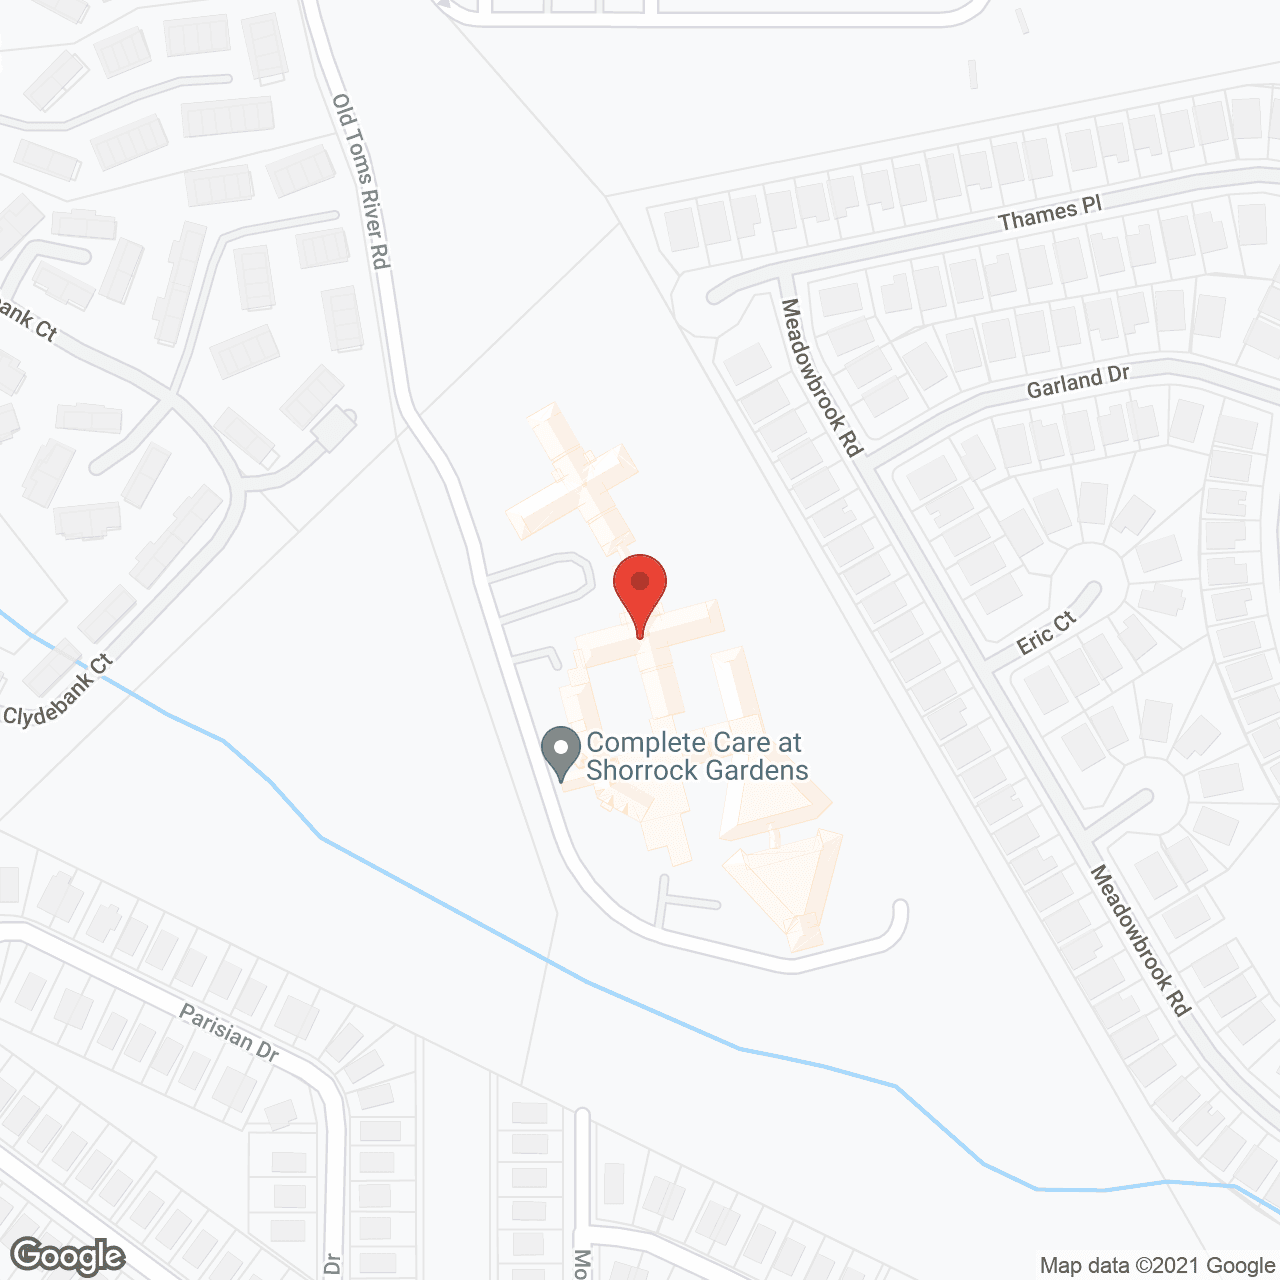 Complete Care at Shorrock Gardens in google map